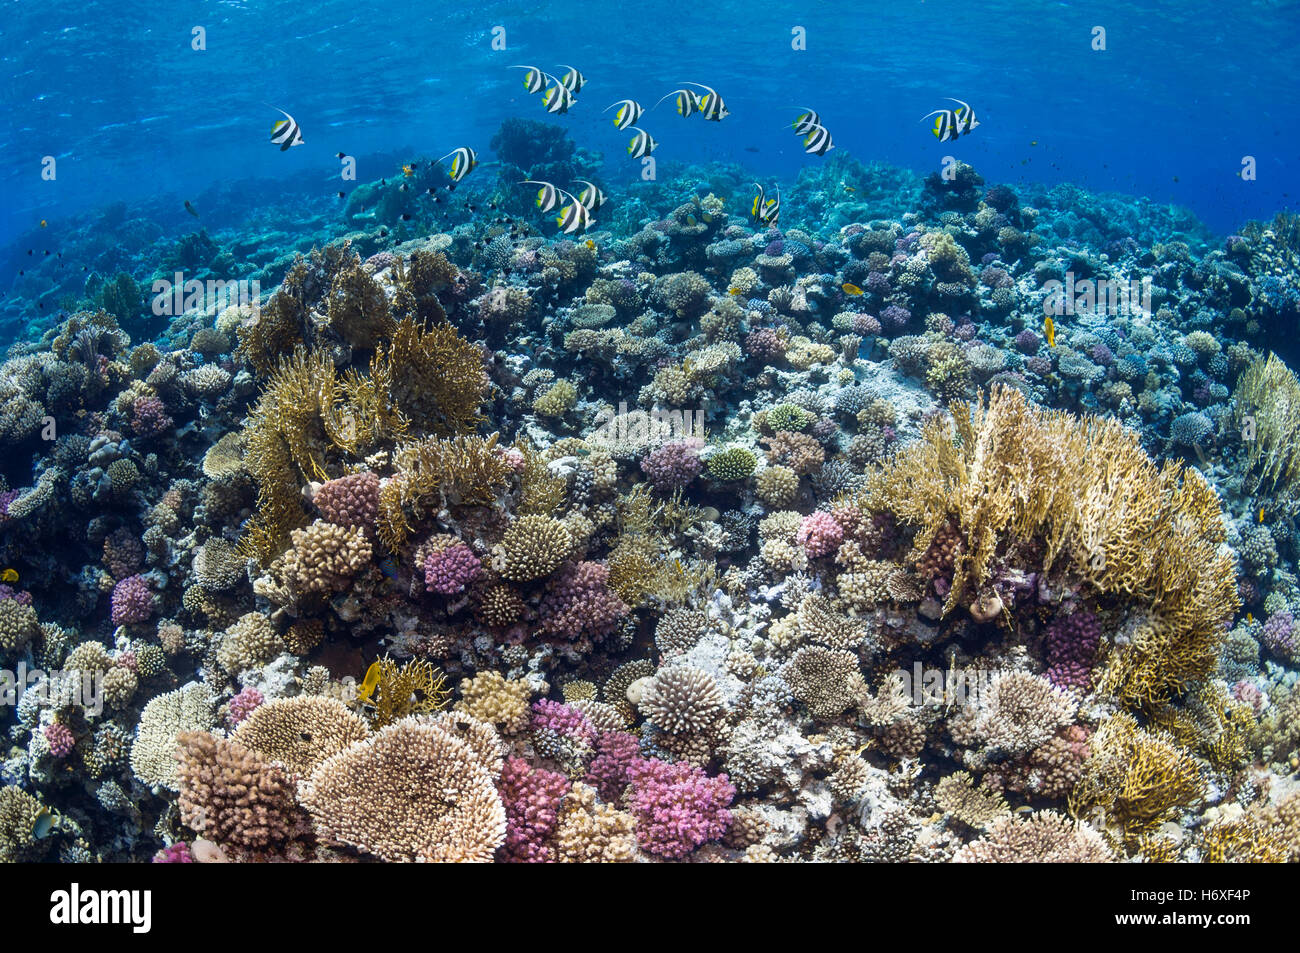 Top of coral reef with Red Sea bannerfish [Heniochus intermedius].  Egypt, Red Sea. Stock Photo